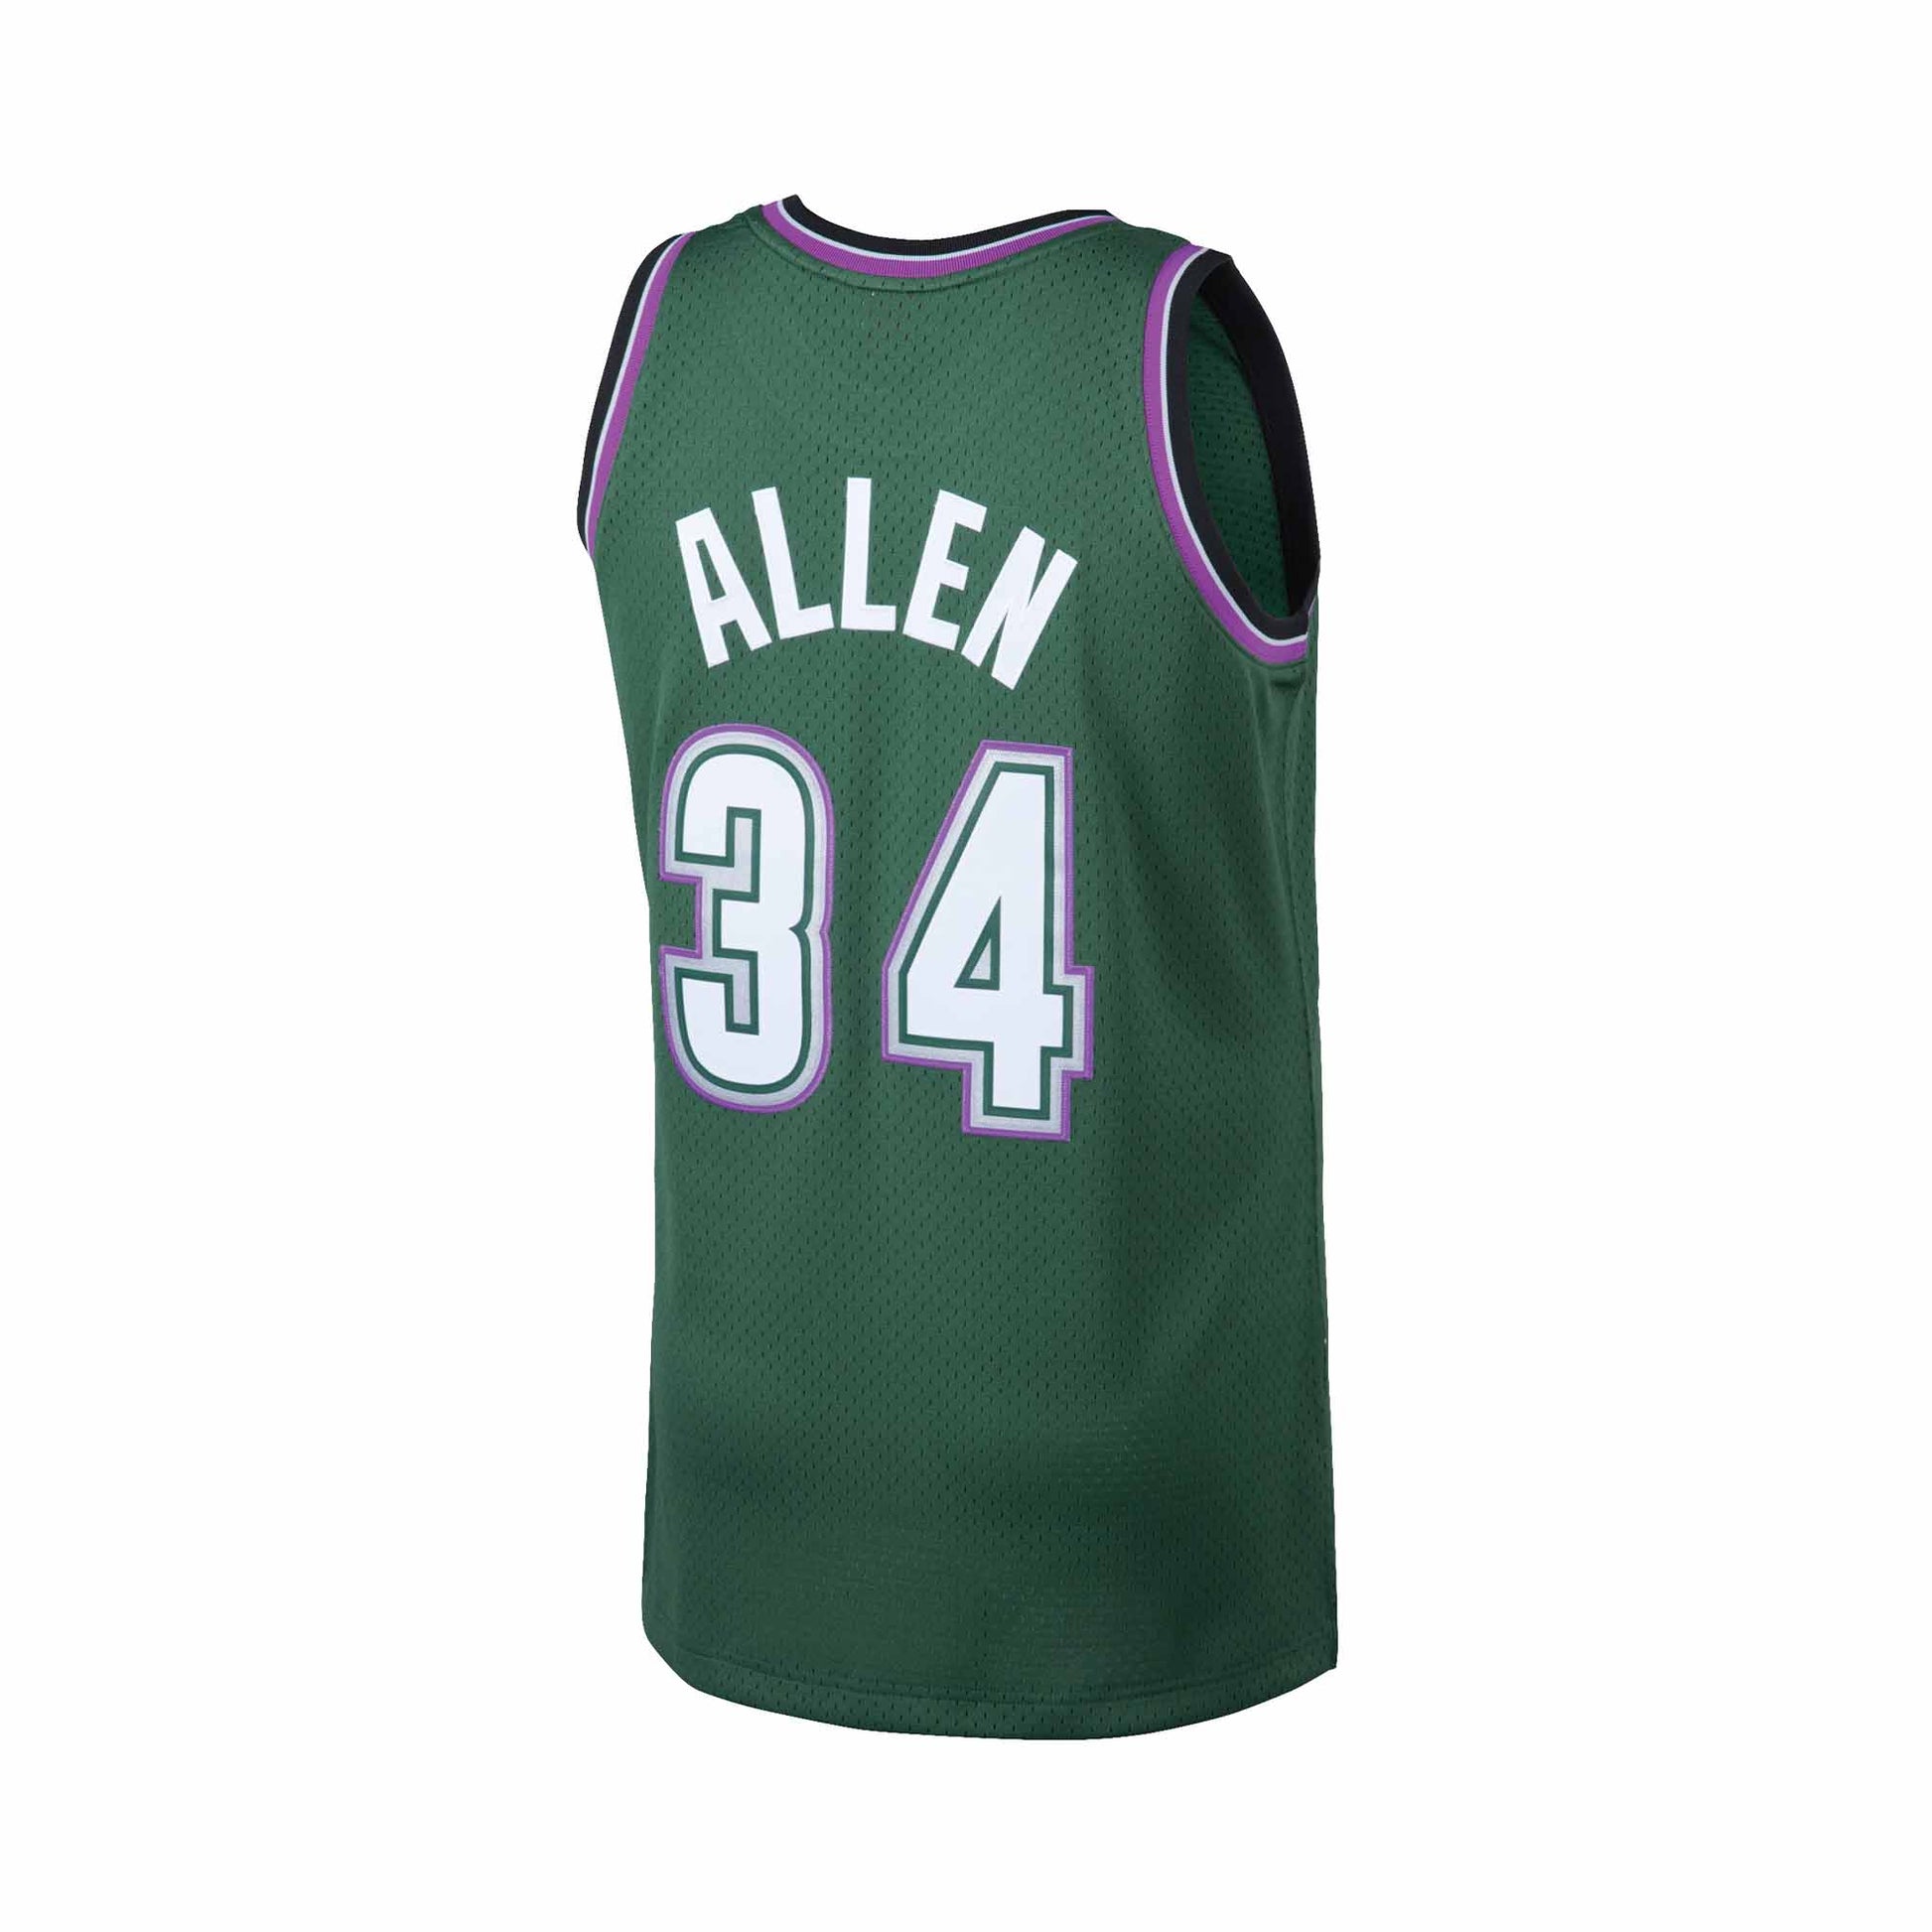 Available] Get New Ray Allen Jersey White #34